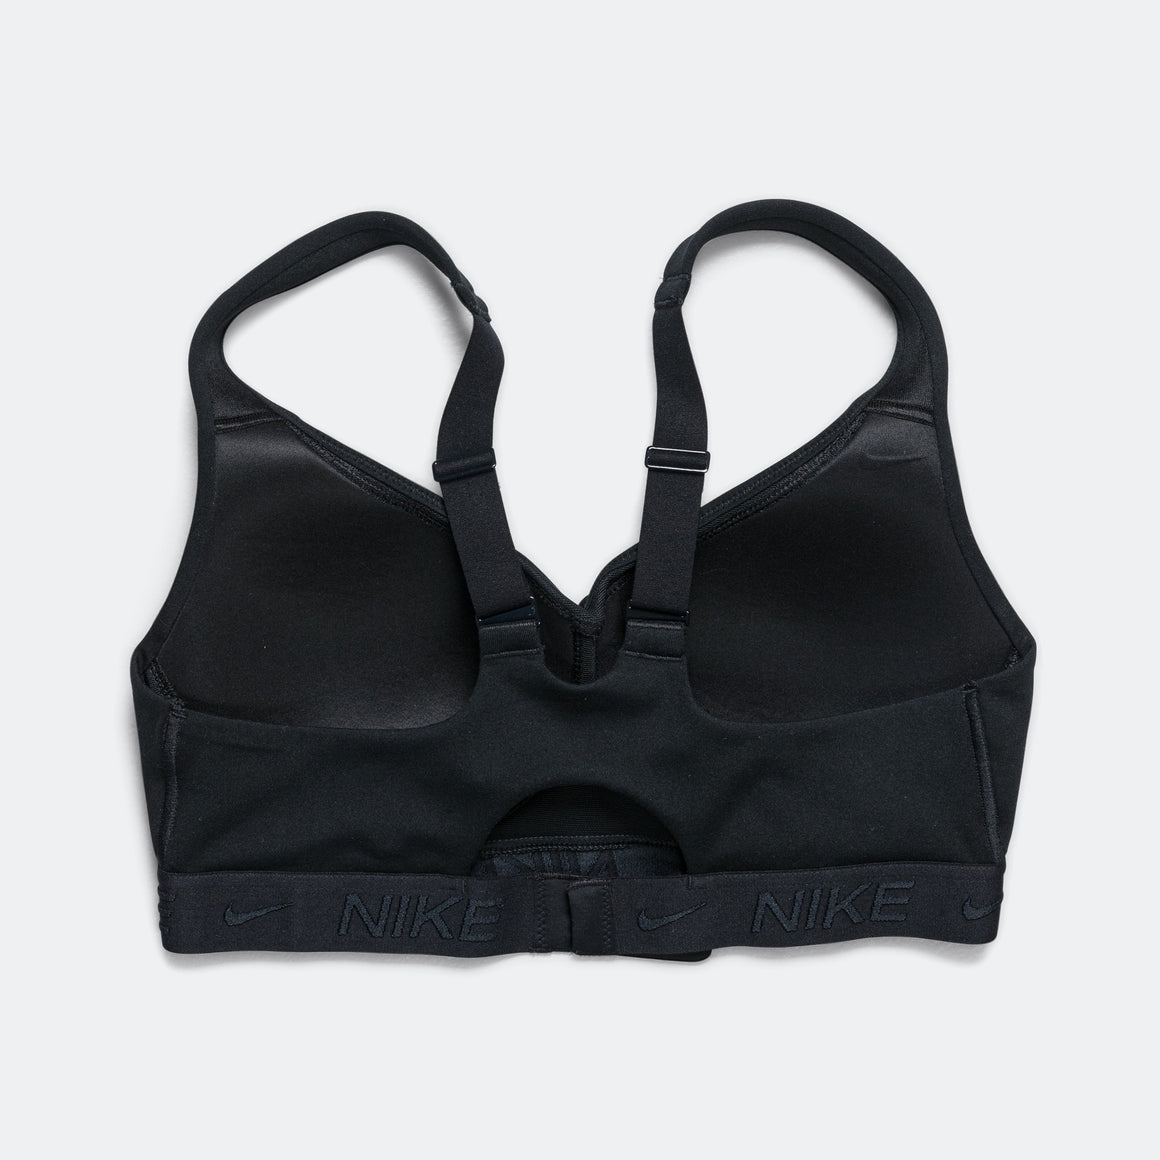 Nike - Womens Indy High Support Bra - Black/Black - Up There Athletics